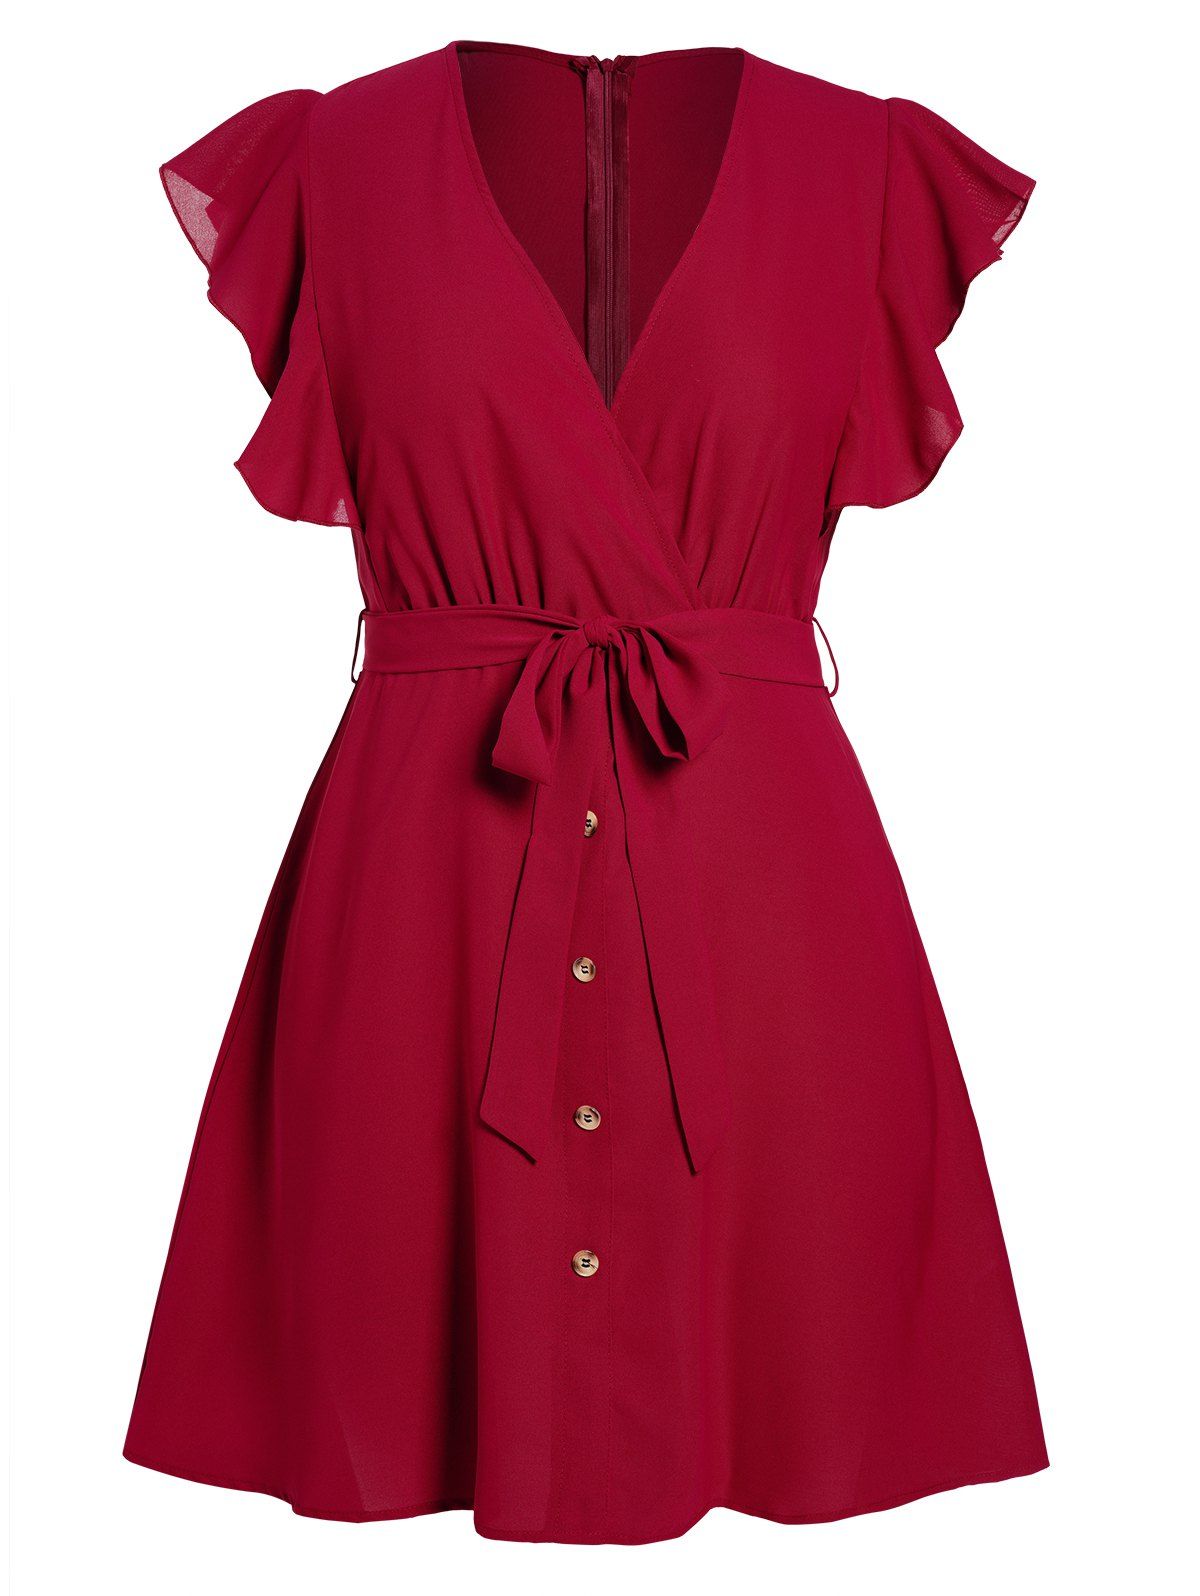 Plus Size Dress Surplice Belted High Waisted Mock Button Plunging Neck Flare Sleeve A Line Mini Dress - DEEP RED 4XL